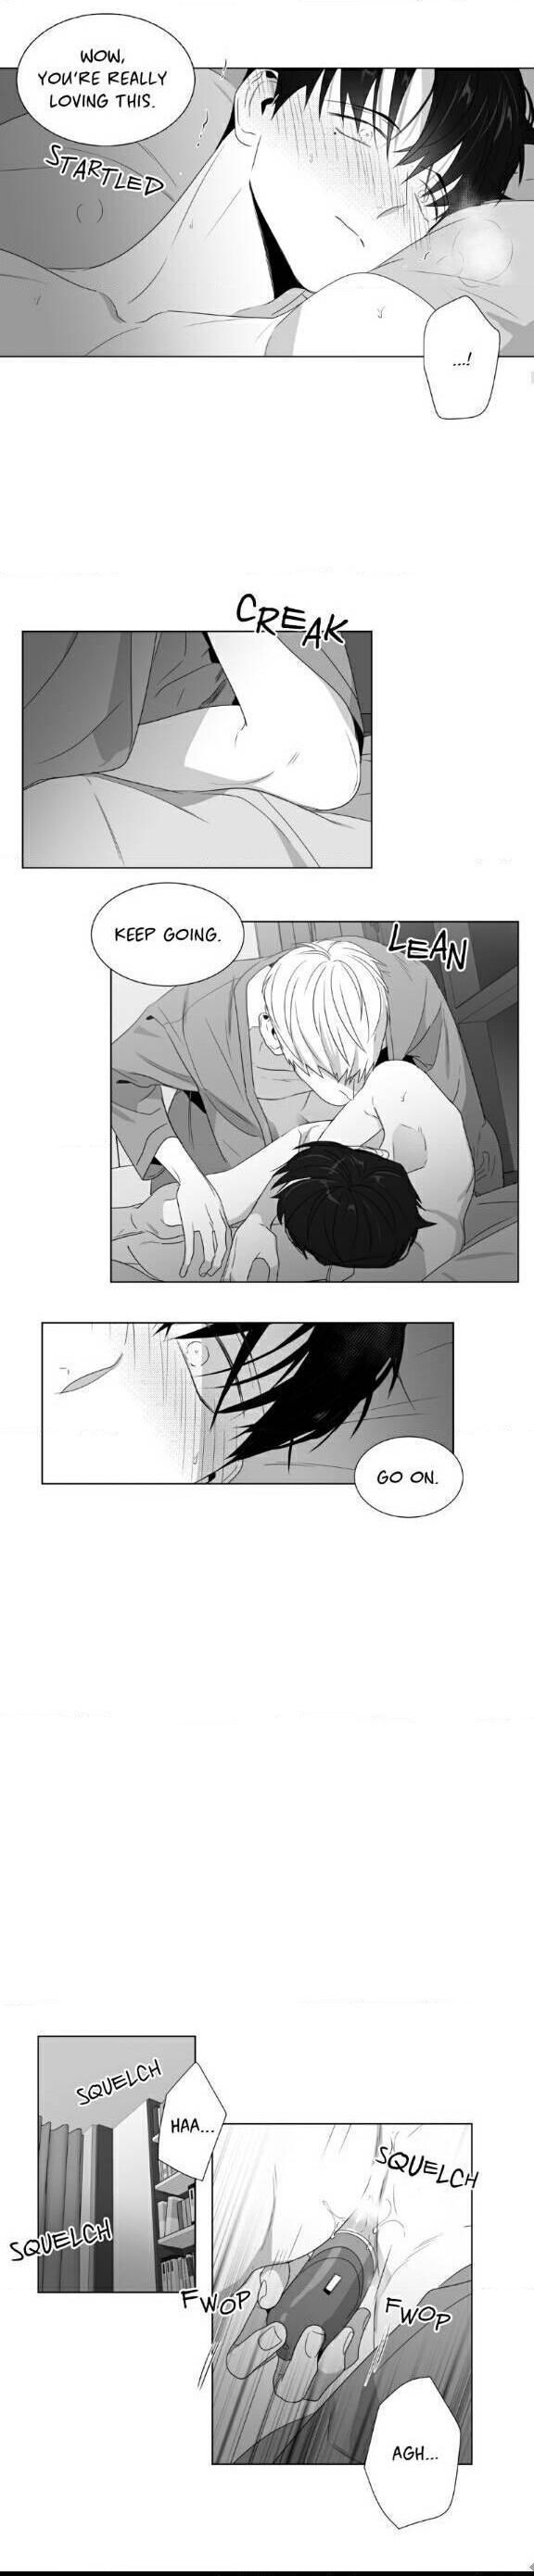 Lover Boy (Lezhin) Chapter 060 page 10